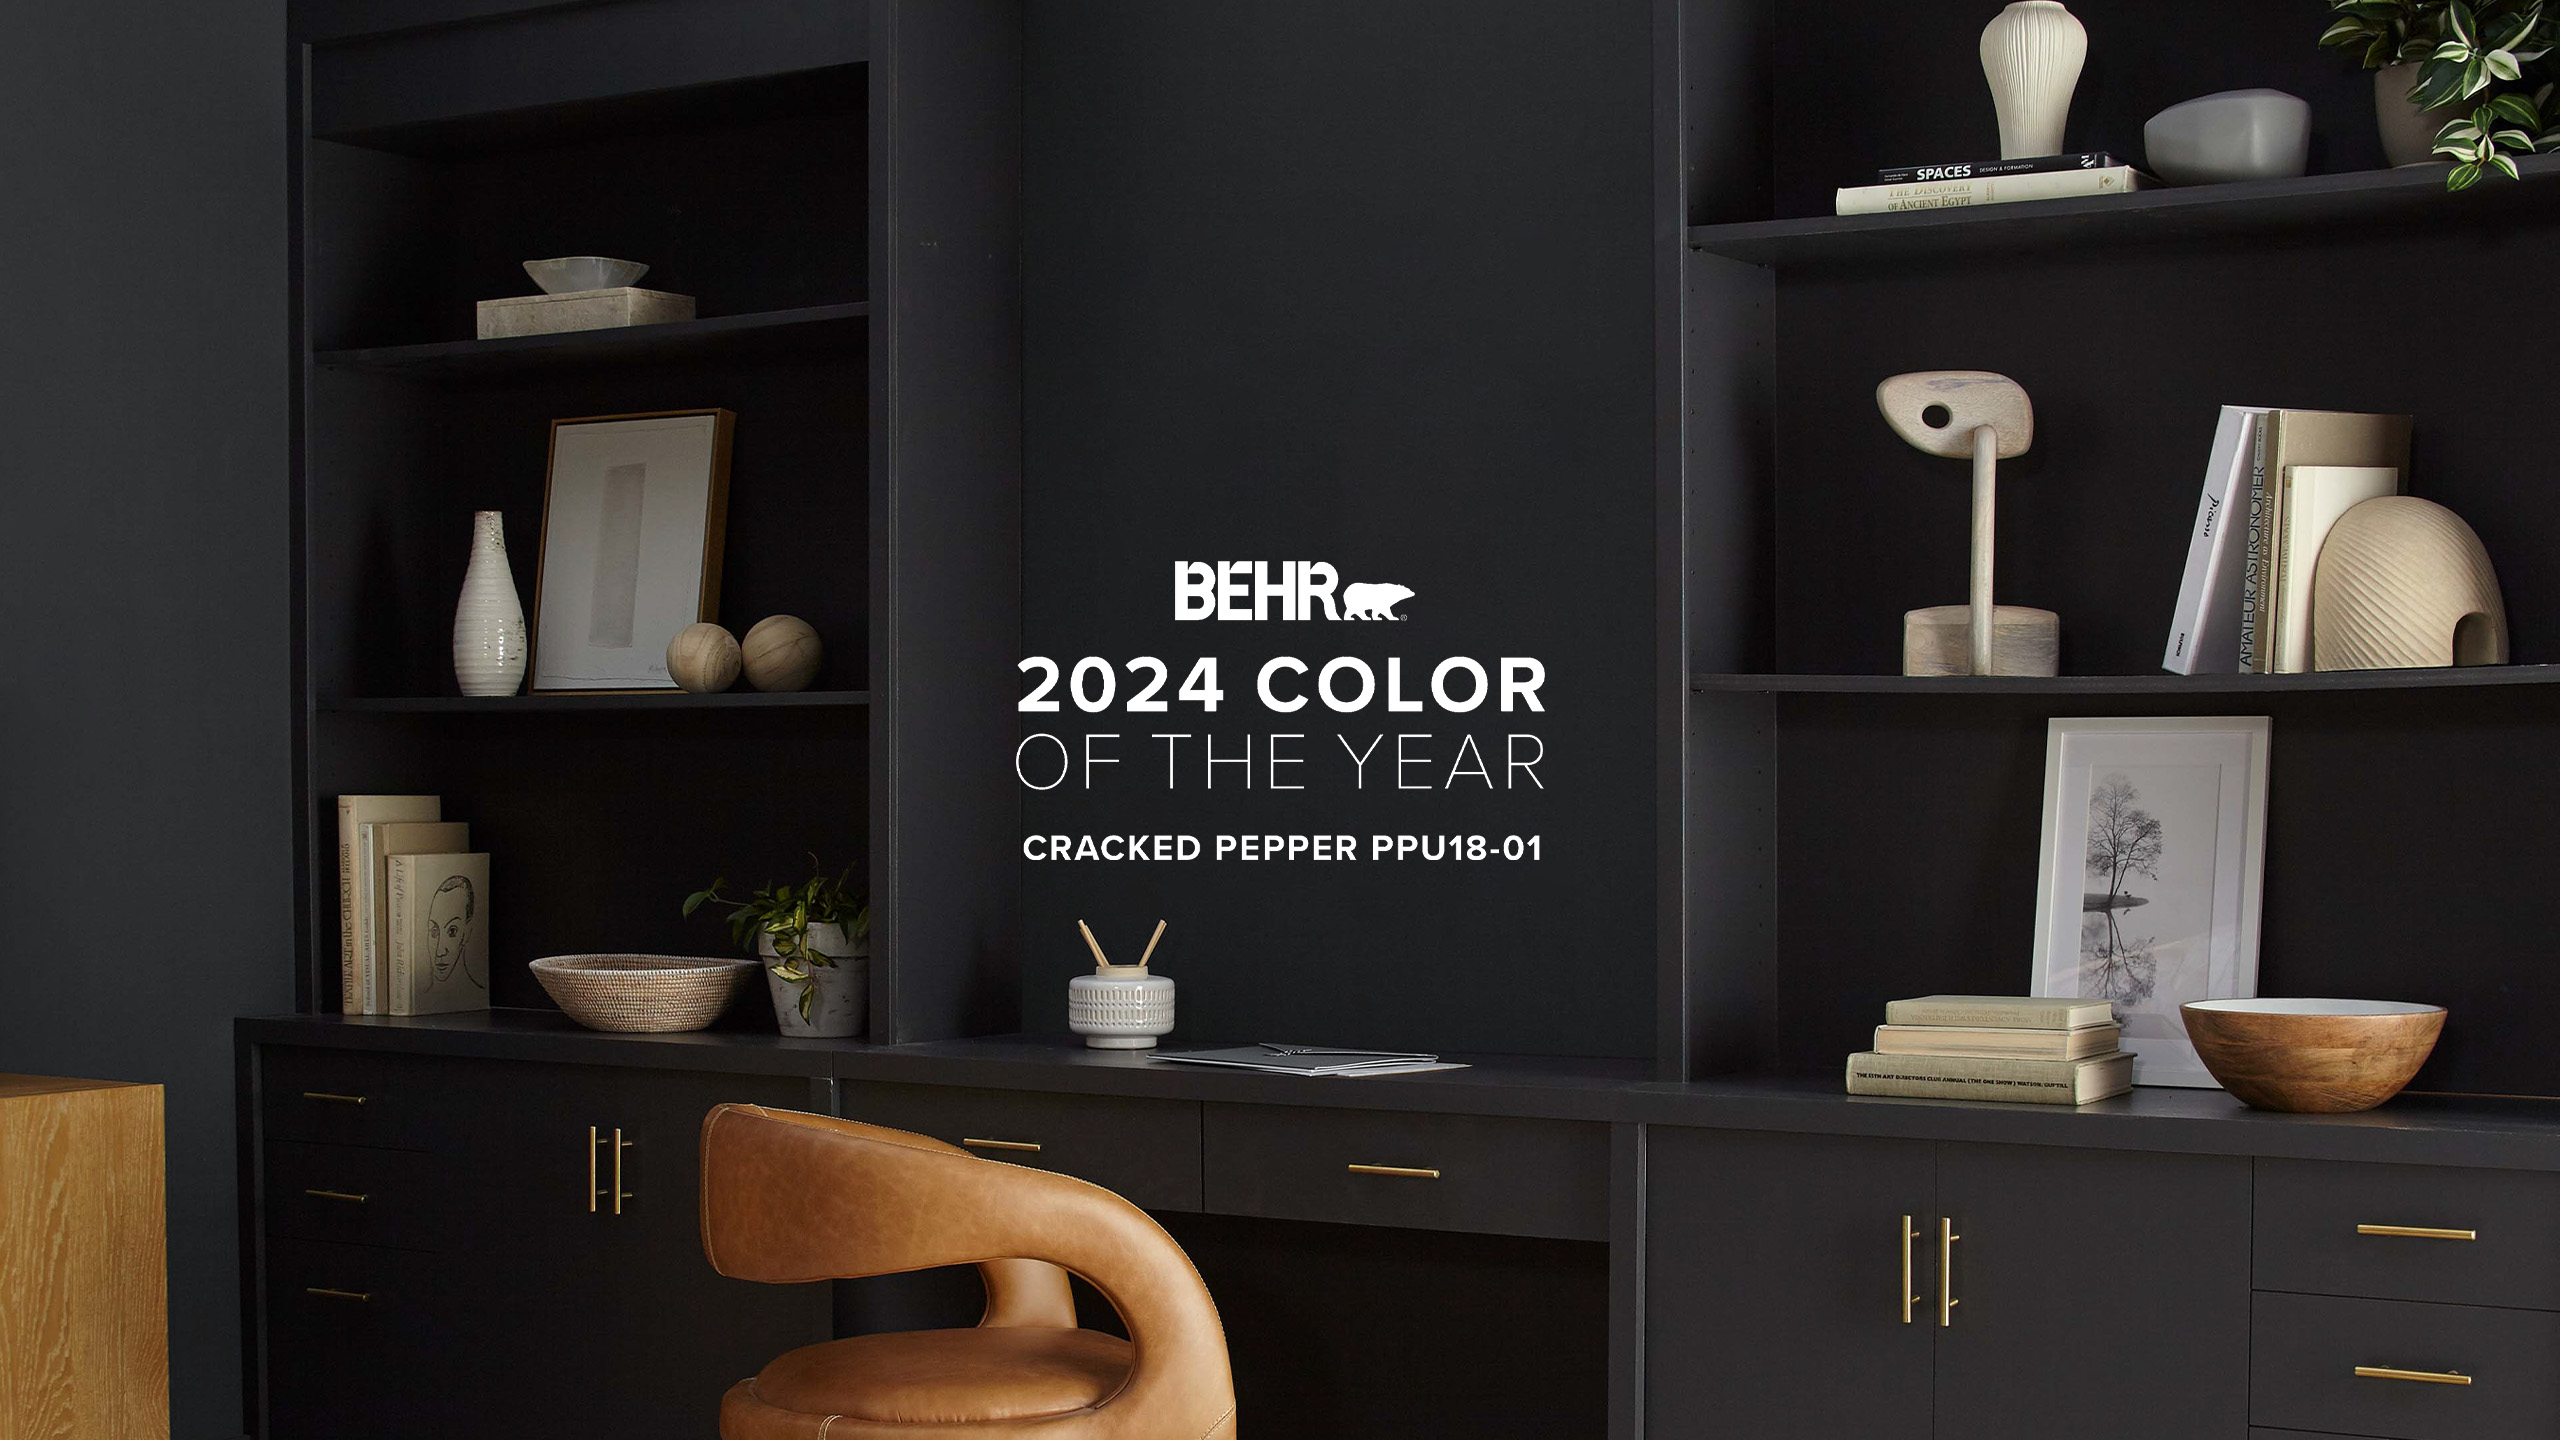 BEHR Color of the Year - Cracked Pepper